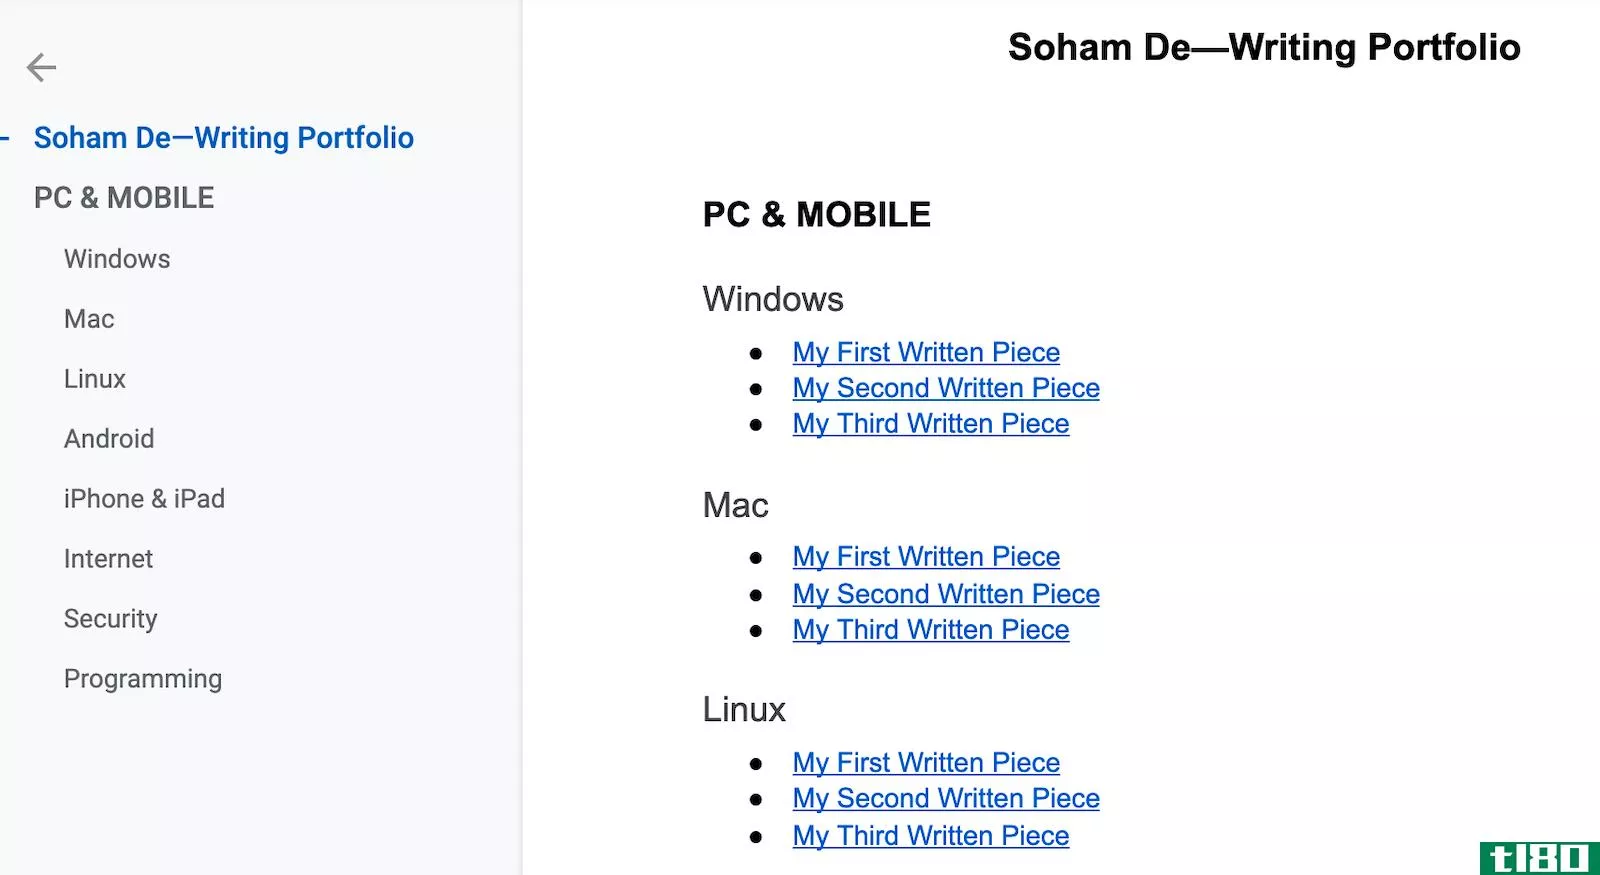 Google Docs writing portfolio main page with secti*** and subsecti*** added.